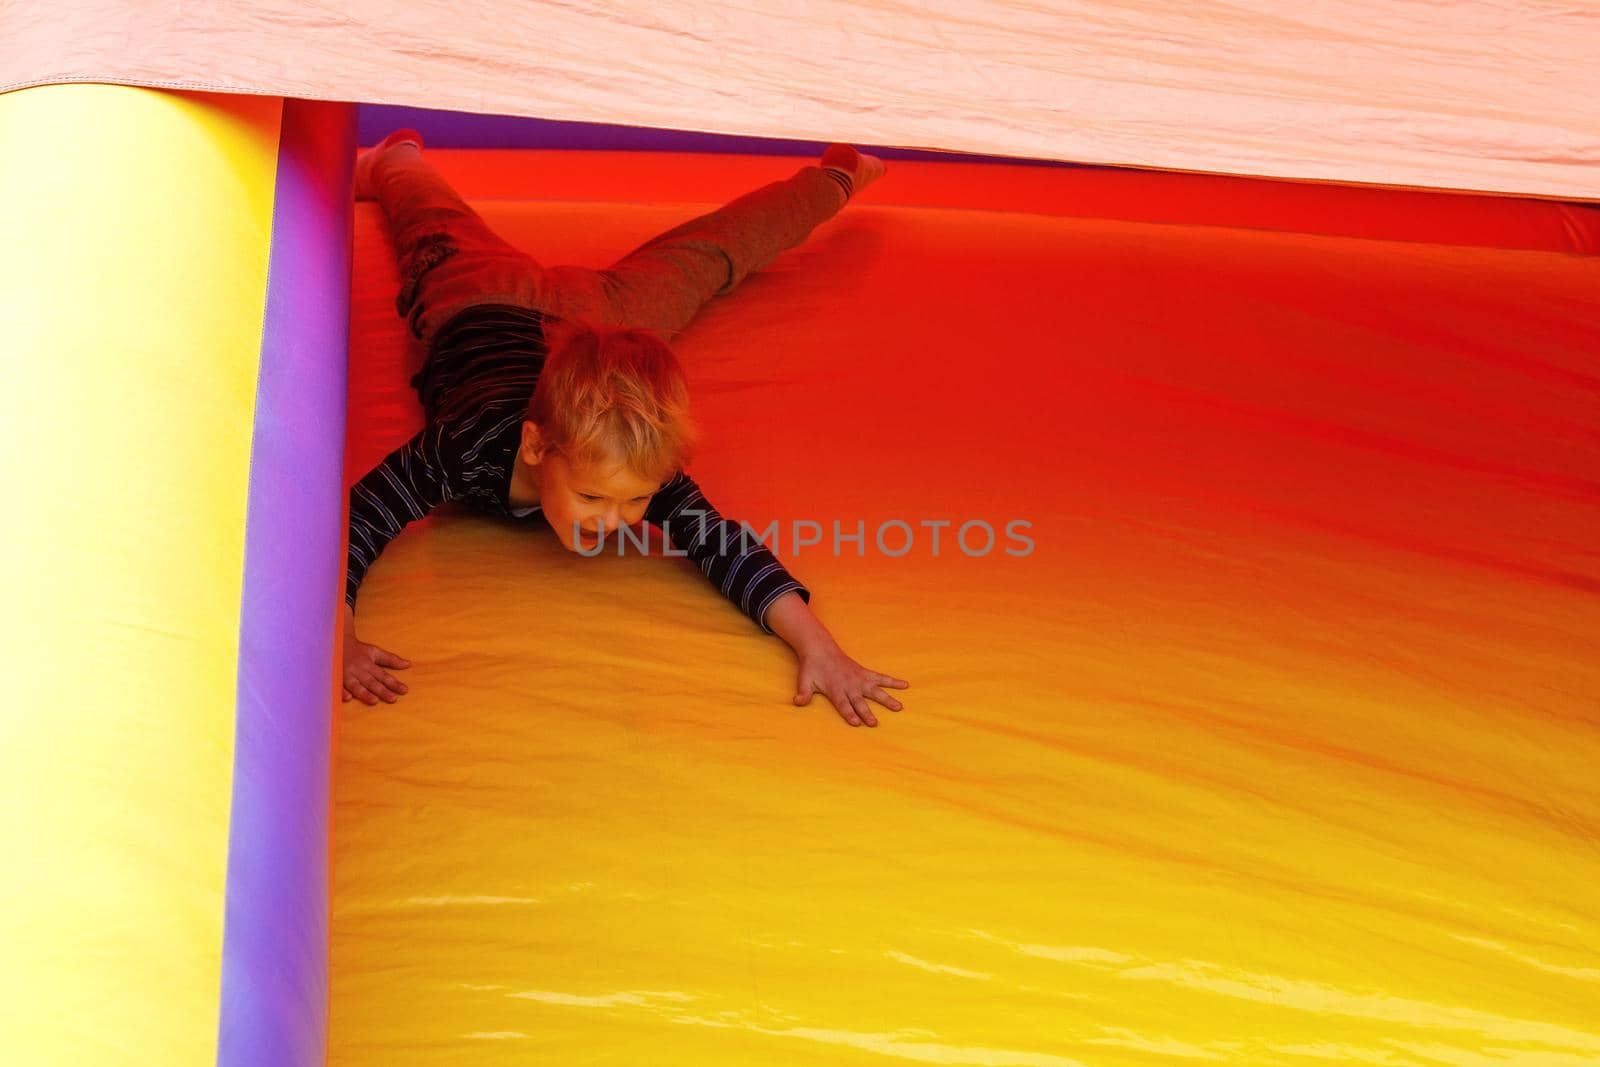 A brave little boy slides down on a red-yellow trampoline at an amusement park. by Lincikas